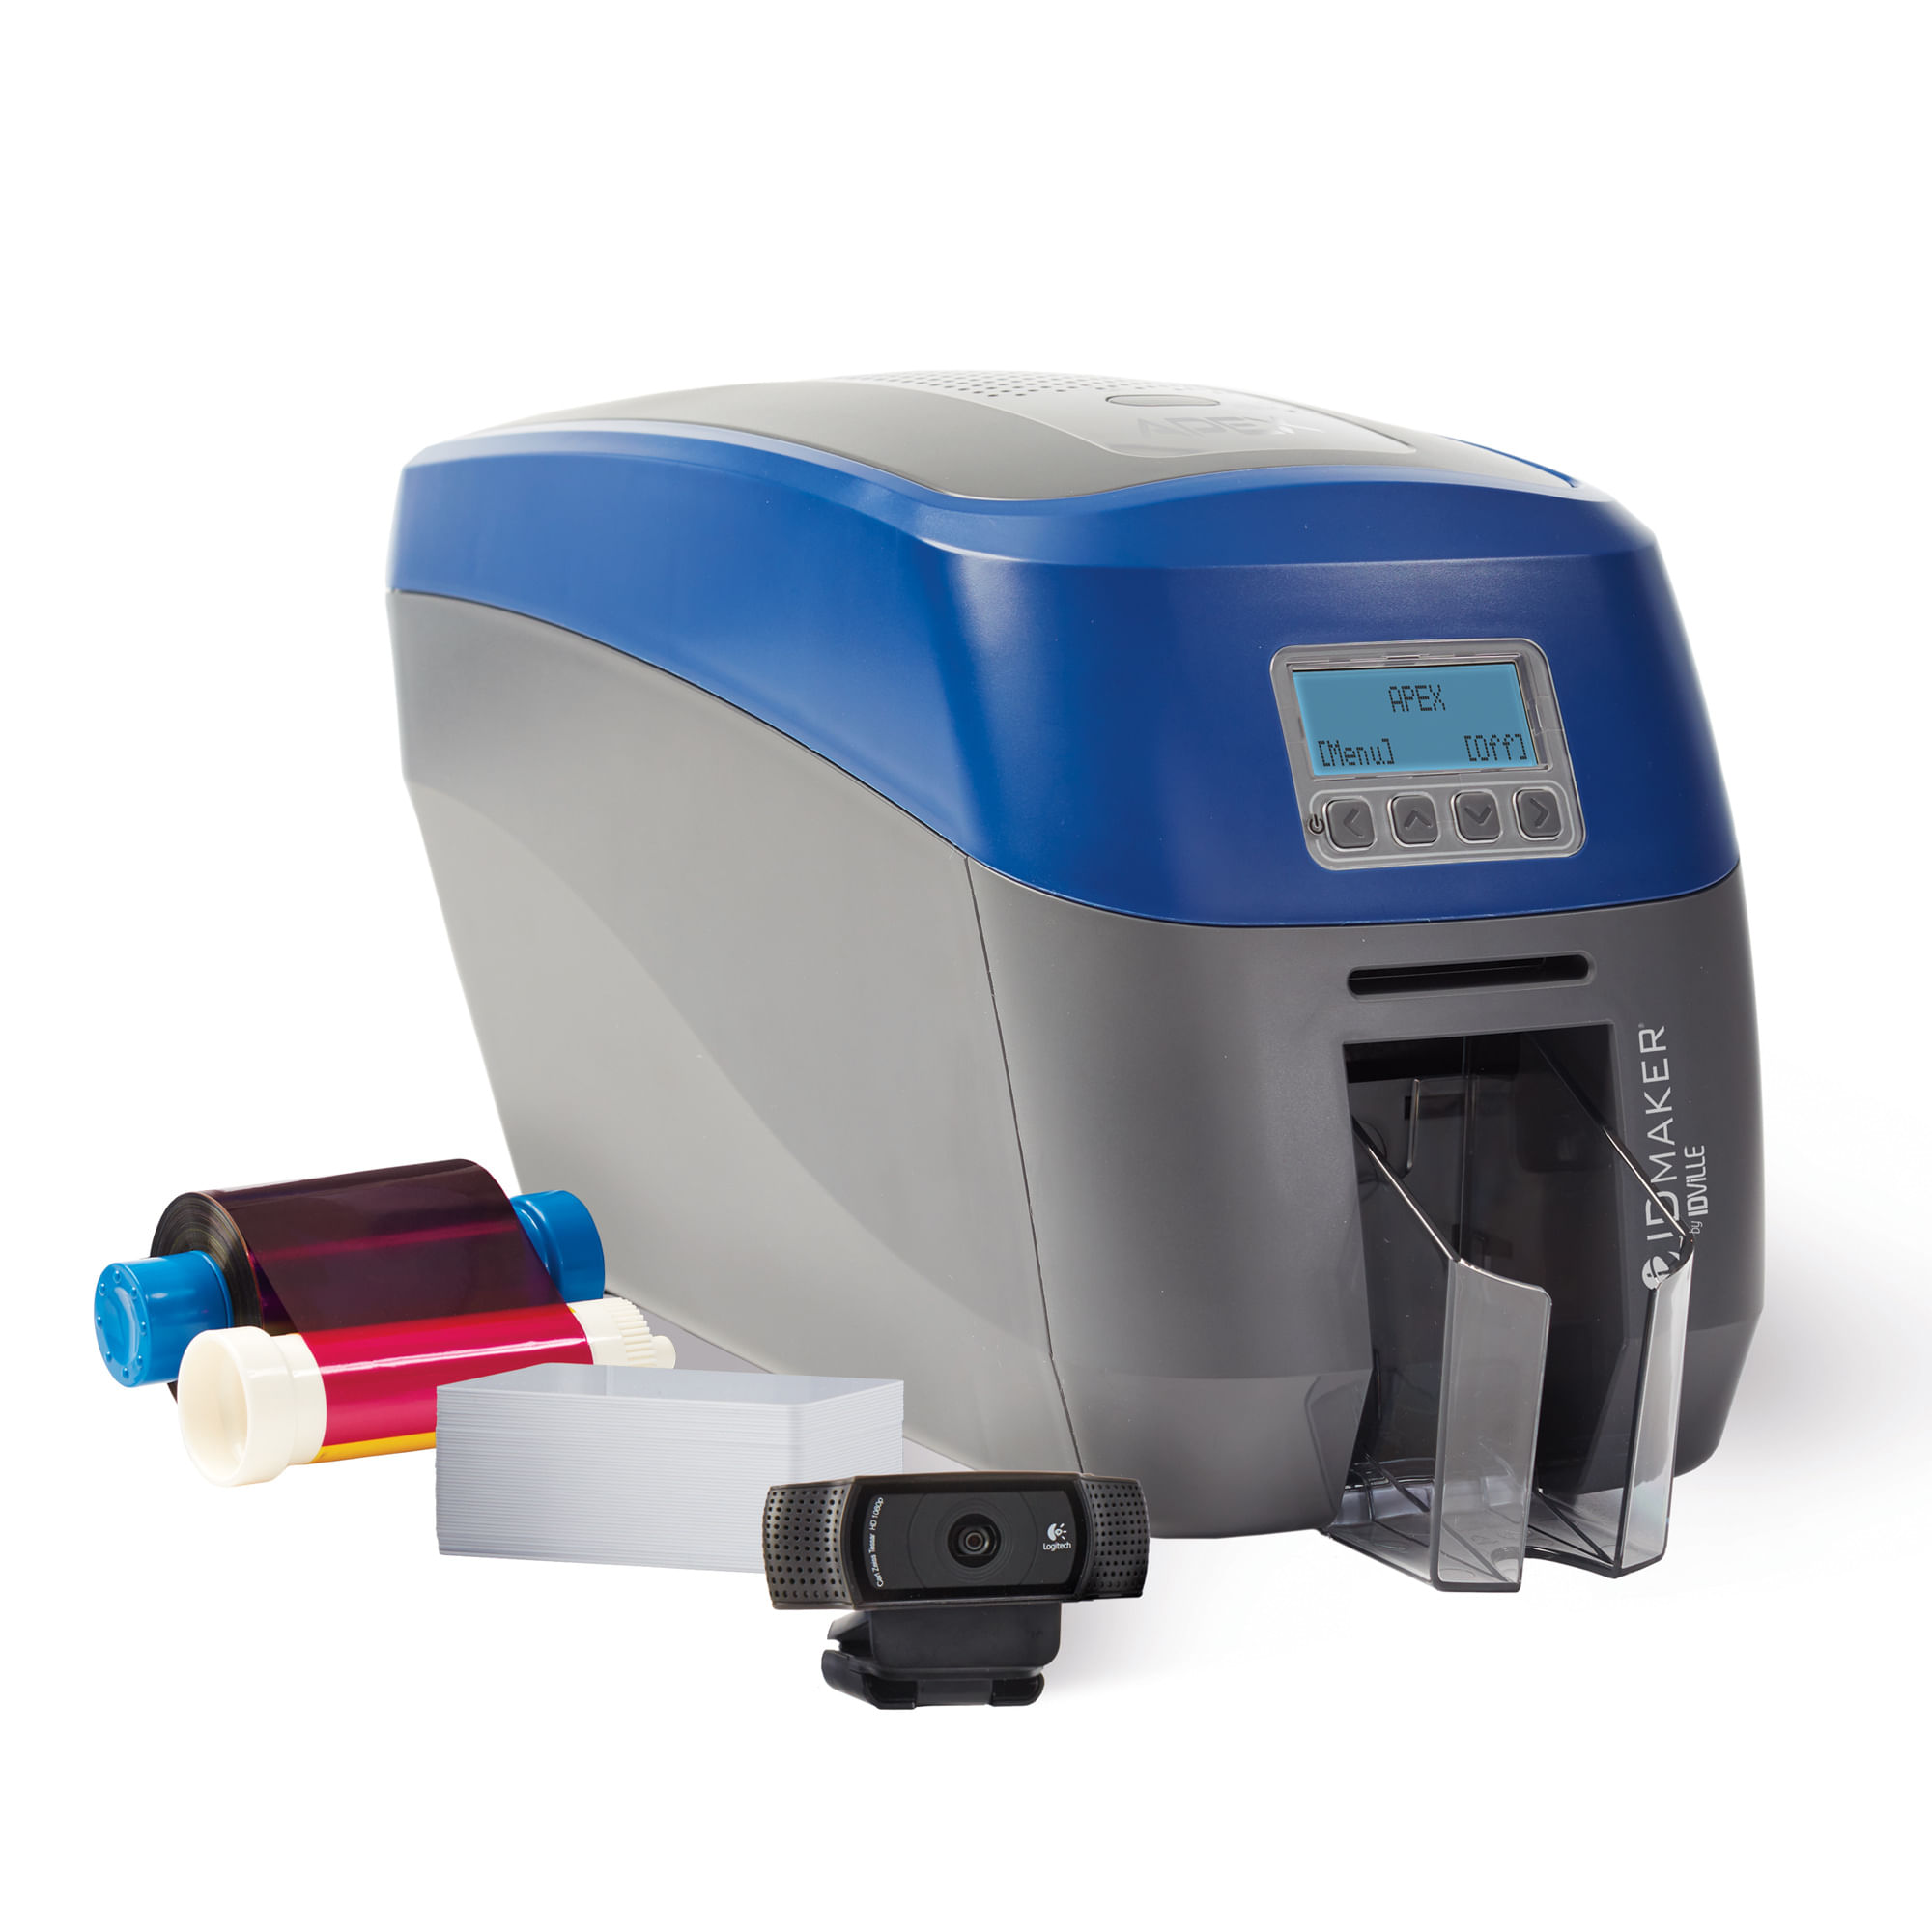  ID Maker Apex 300 Print Ribbon - Full-Color YMCKO Printer  Ribbon - for PVC ID Badge Cards - Professional Print Quality - Official ID  Maker Brand Printer Ribbon : Office Products